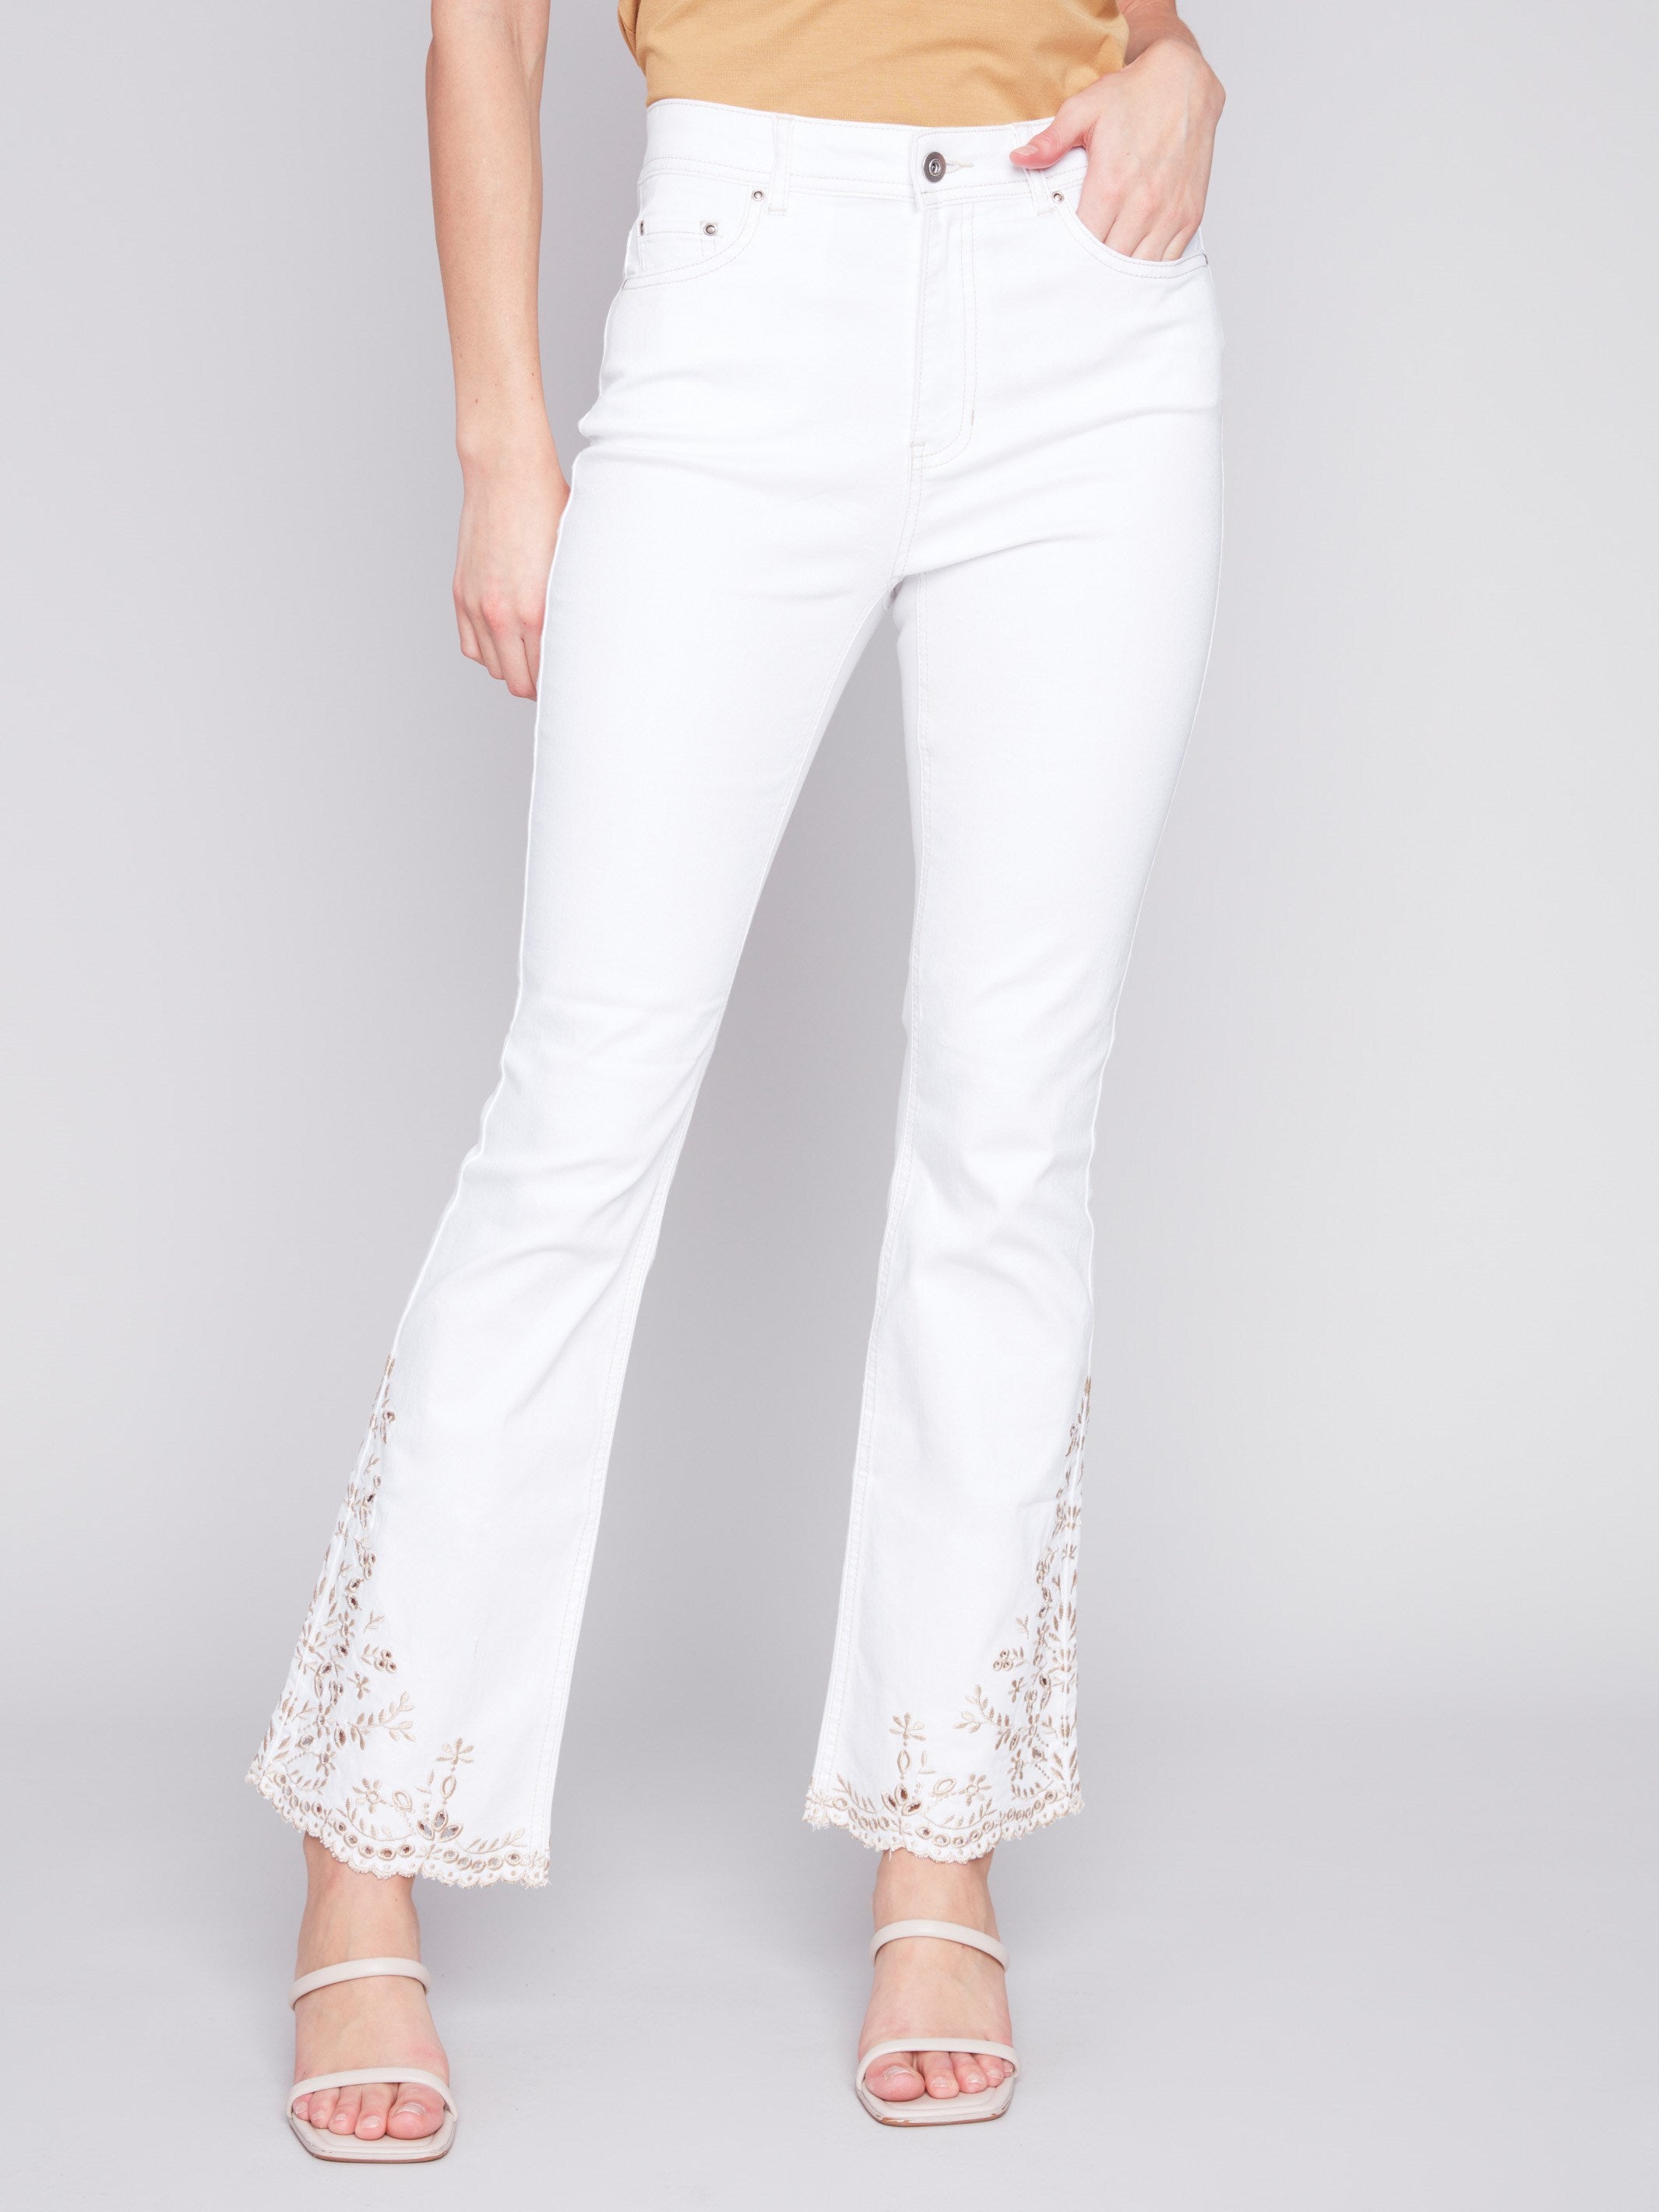 Charlie B Bootcut Twill Jeans with Embroidery - White - Image 2